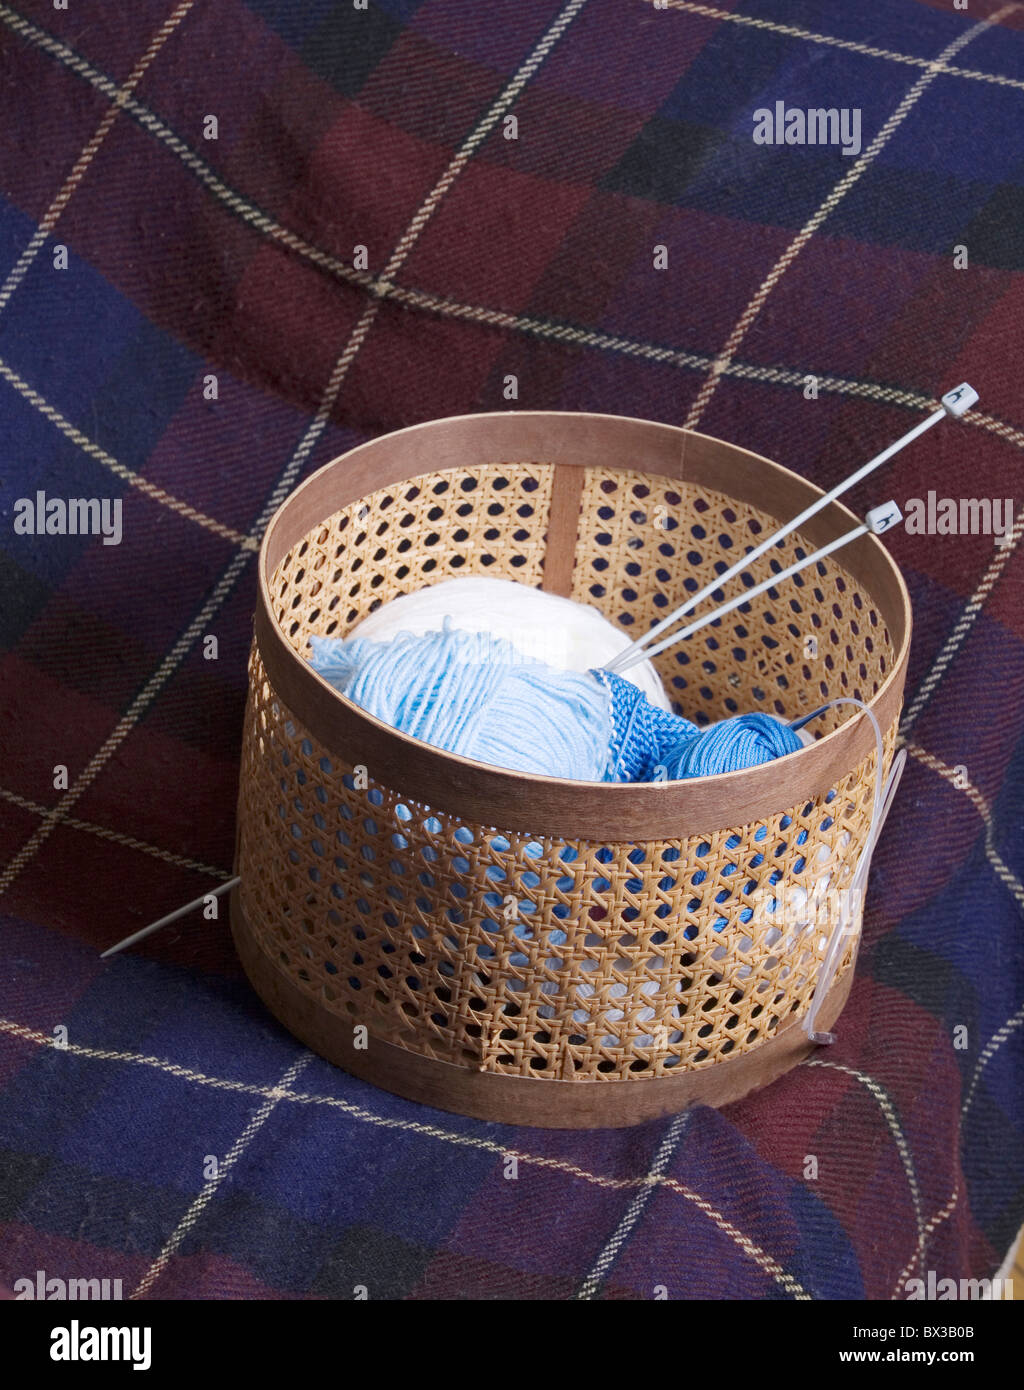 still life of wool and knitting needles in basket Stock Photo